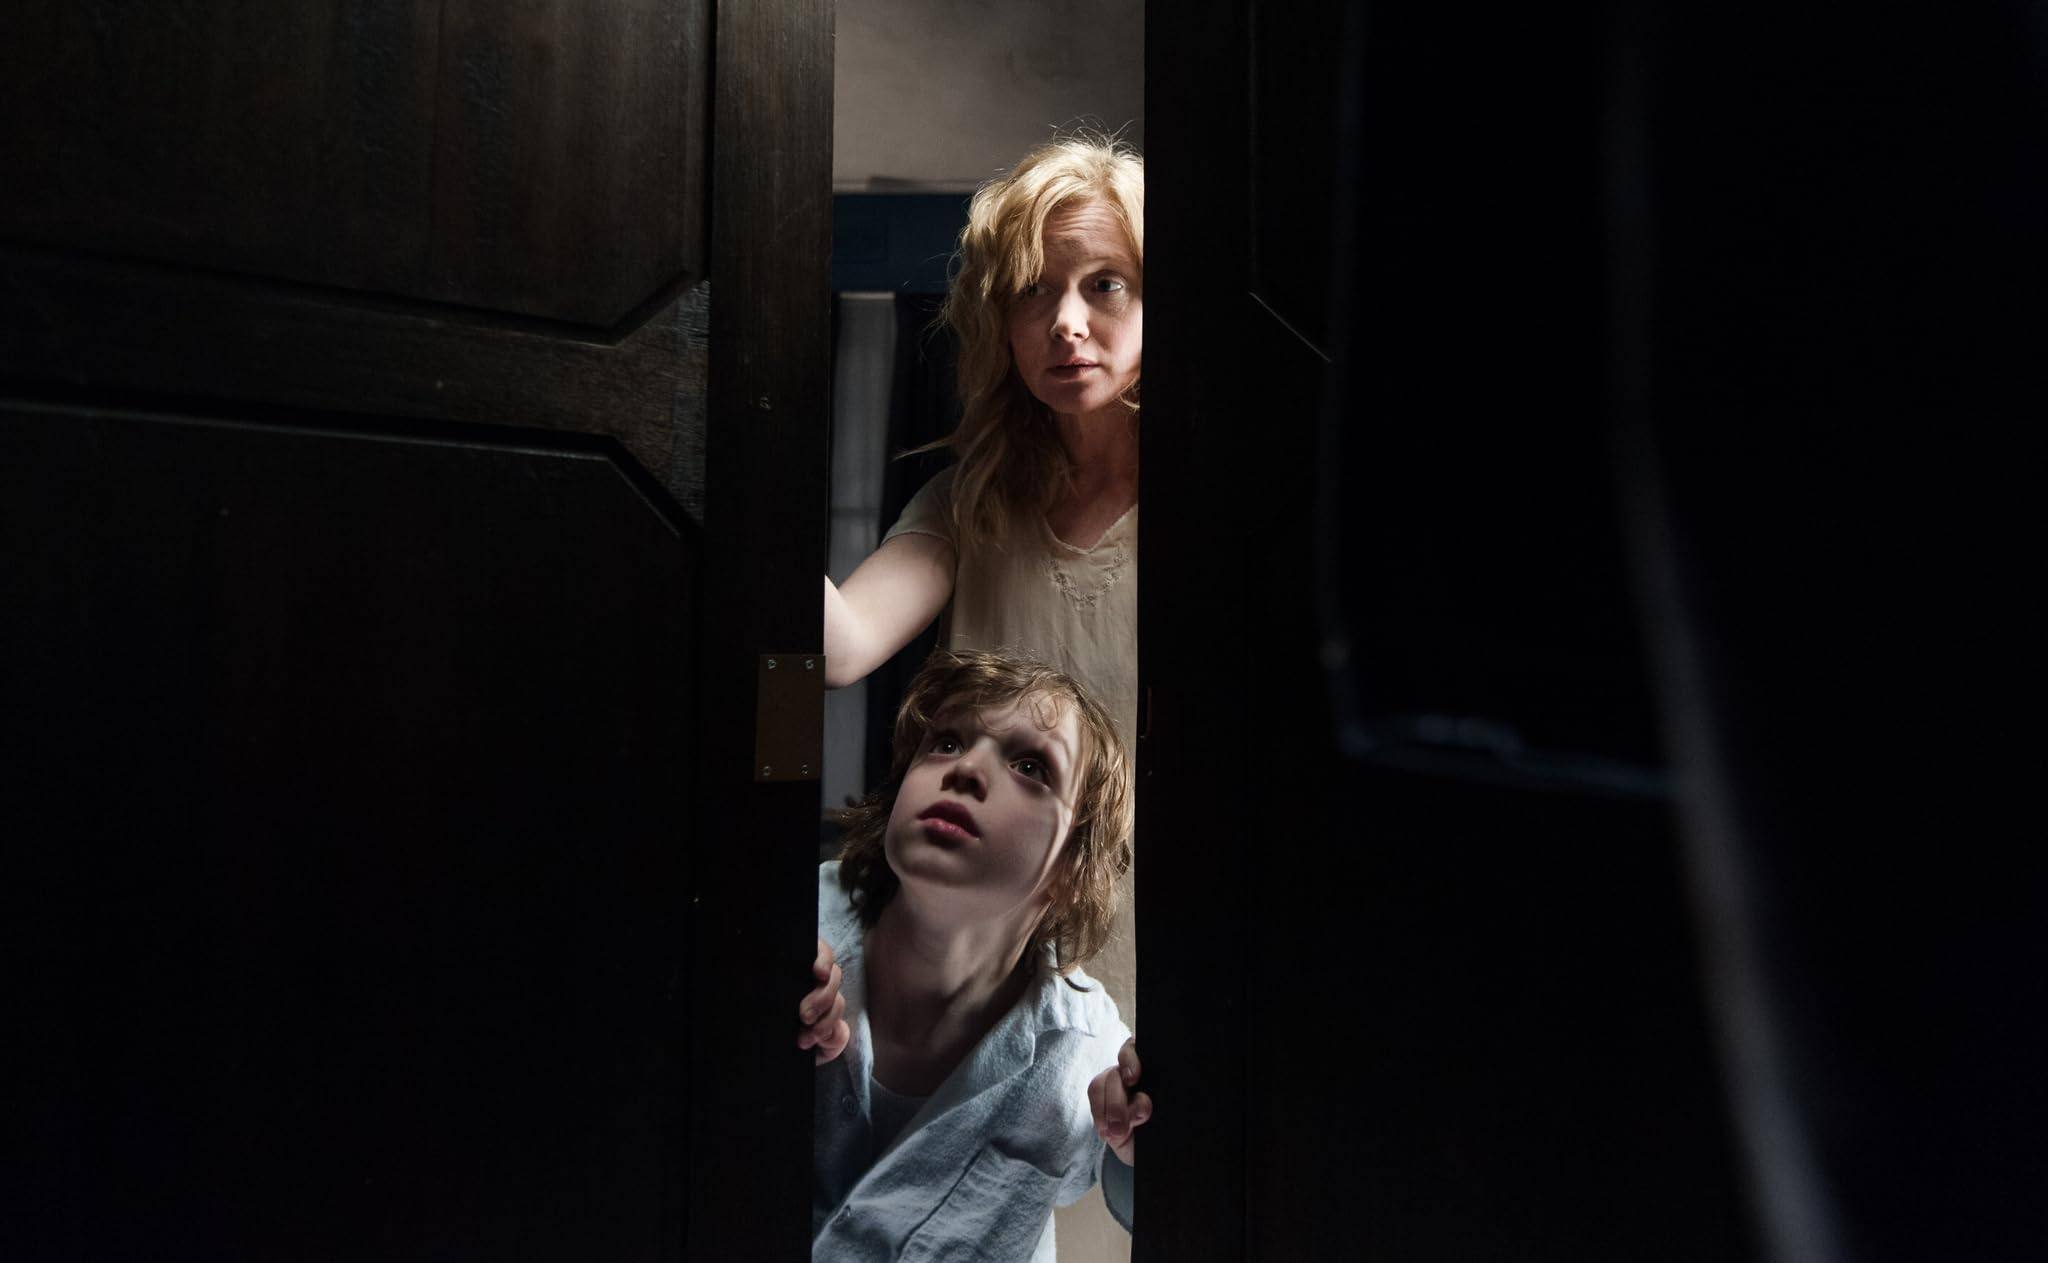 Essie Davis (top) as Amelia and Noah Wiseman as Samuel in a still from The Babadook (2014).

